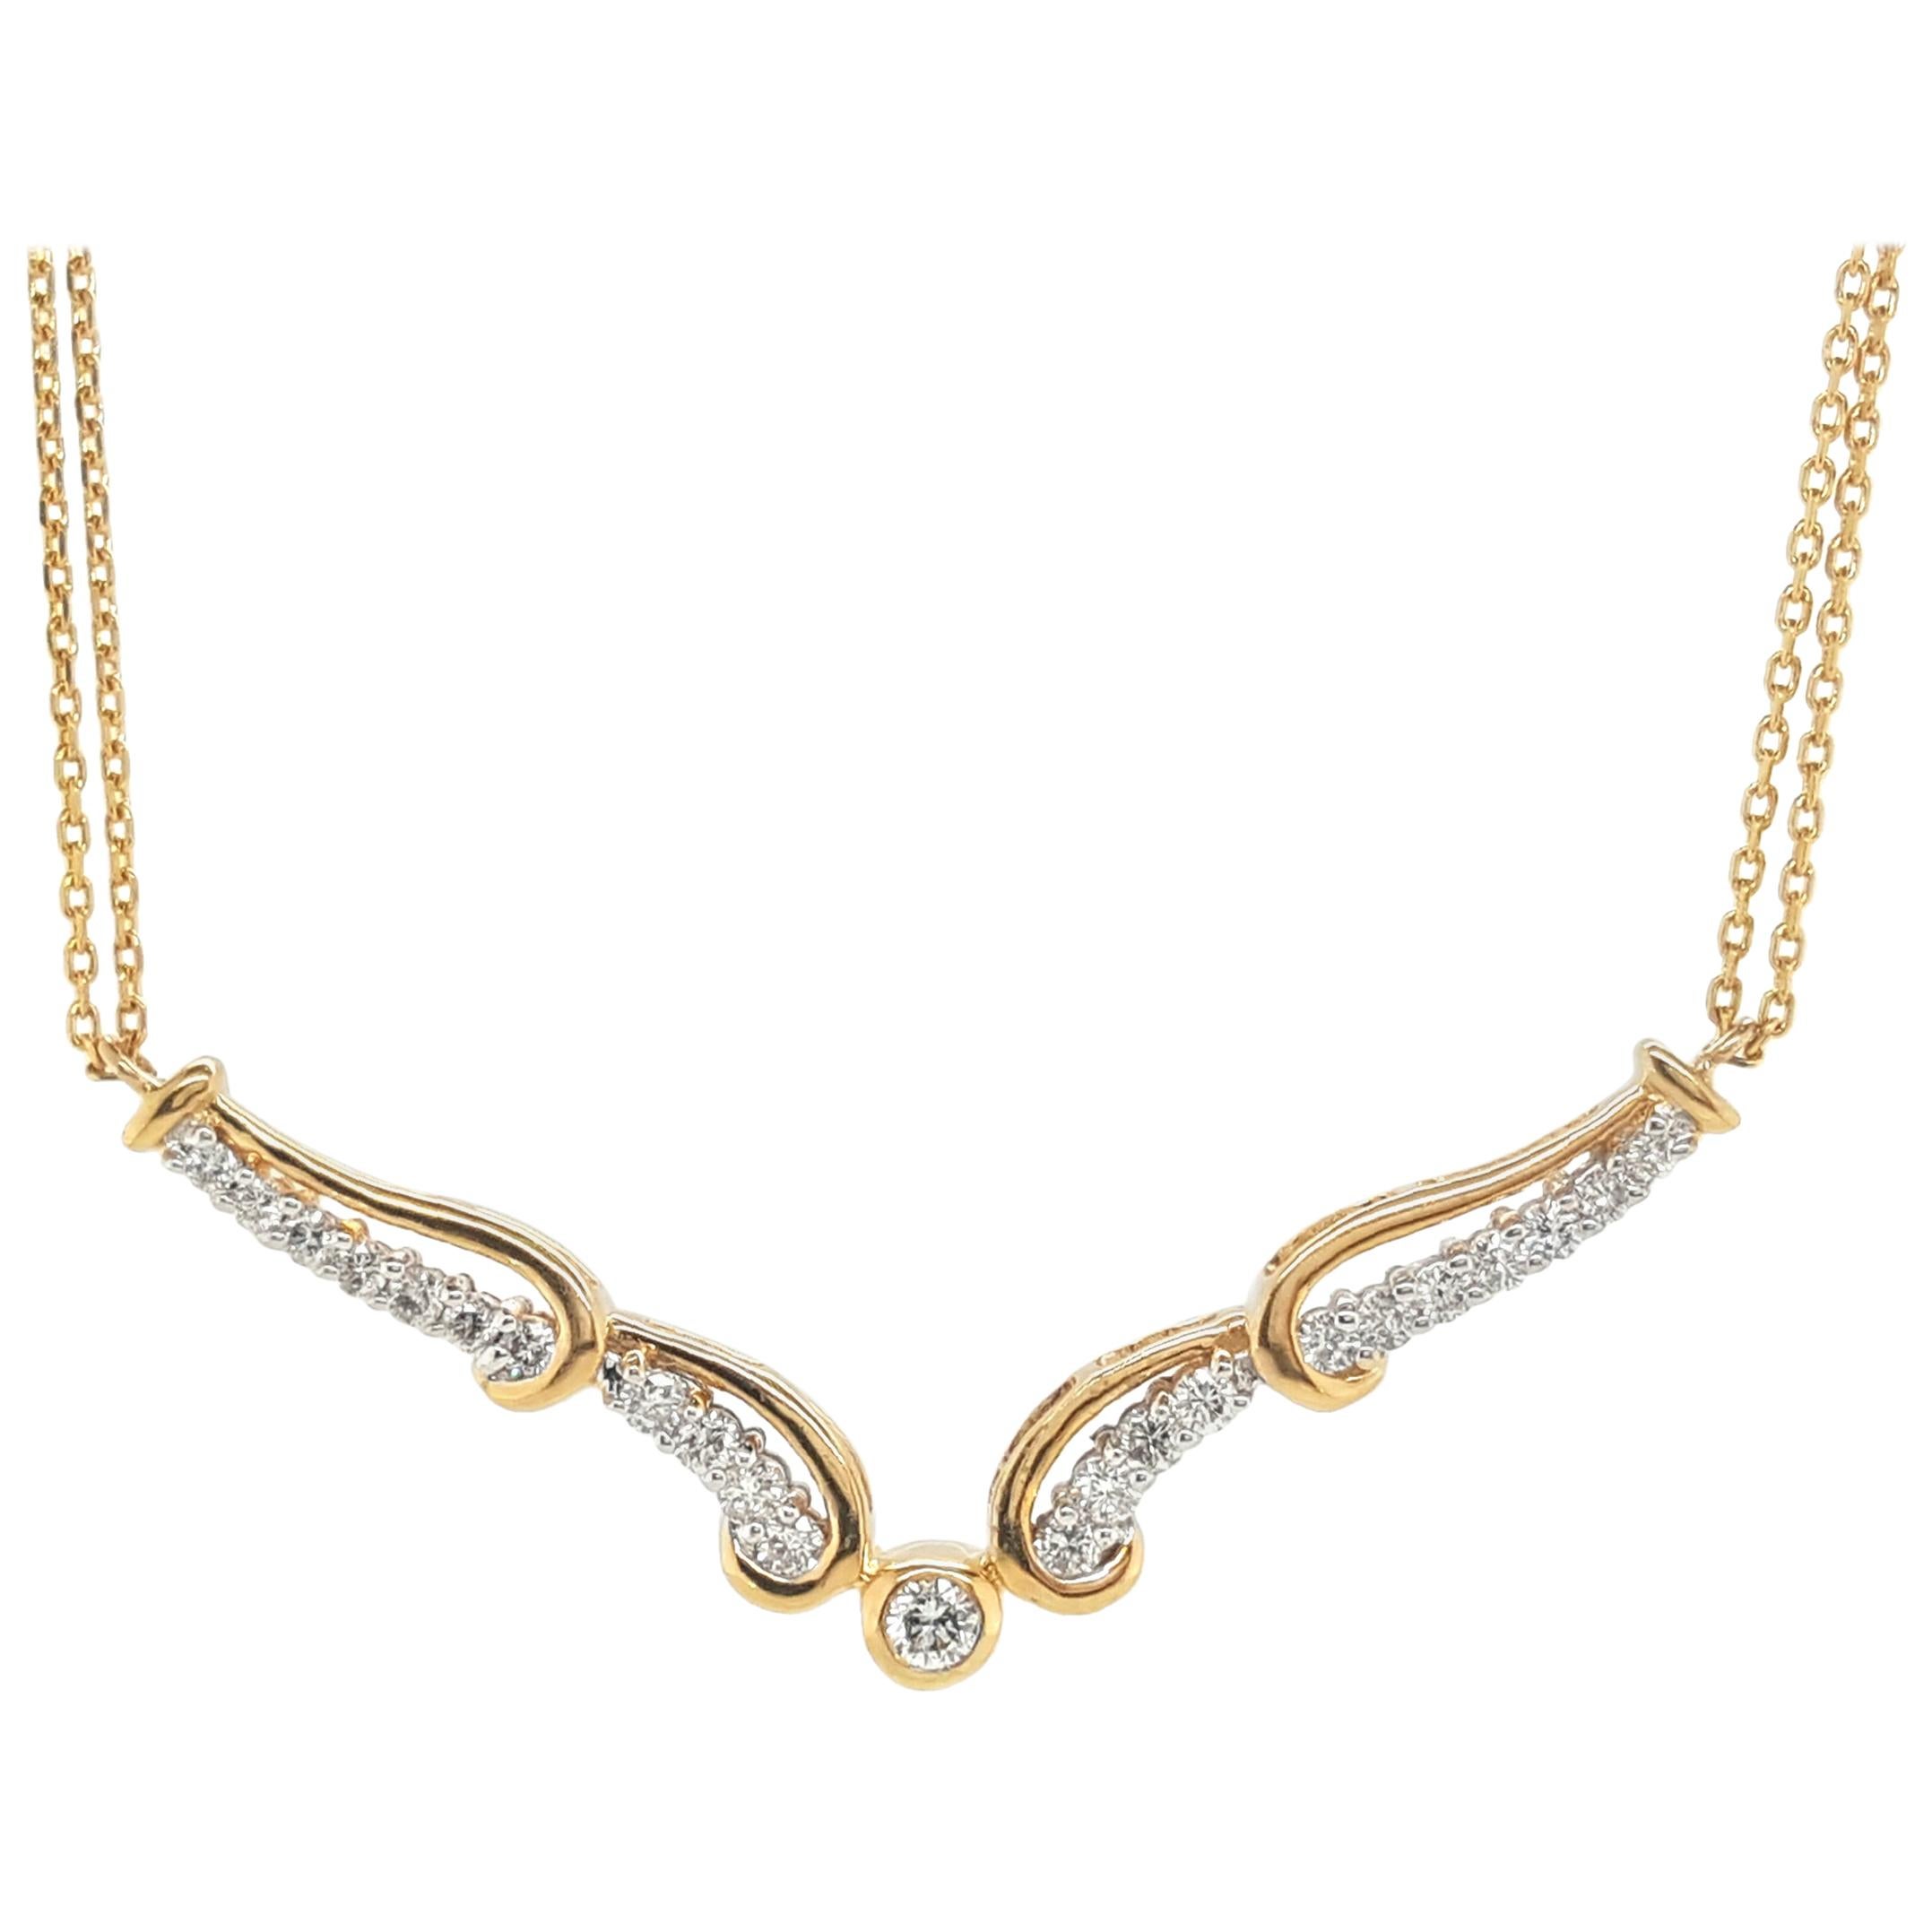 18 Karat Yellow Gold Diamond Necklace with Double Chain For Sale